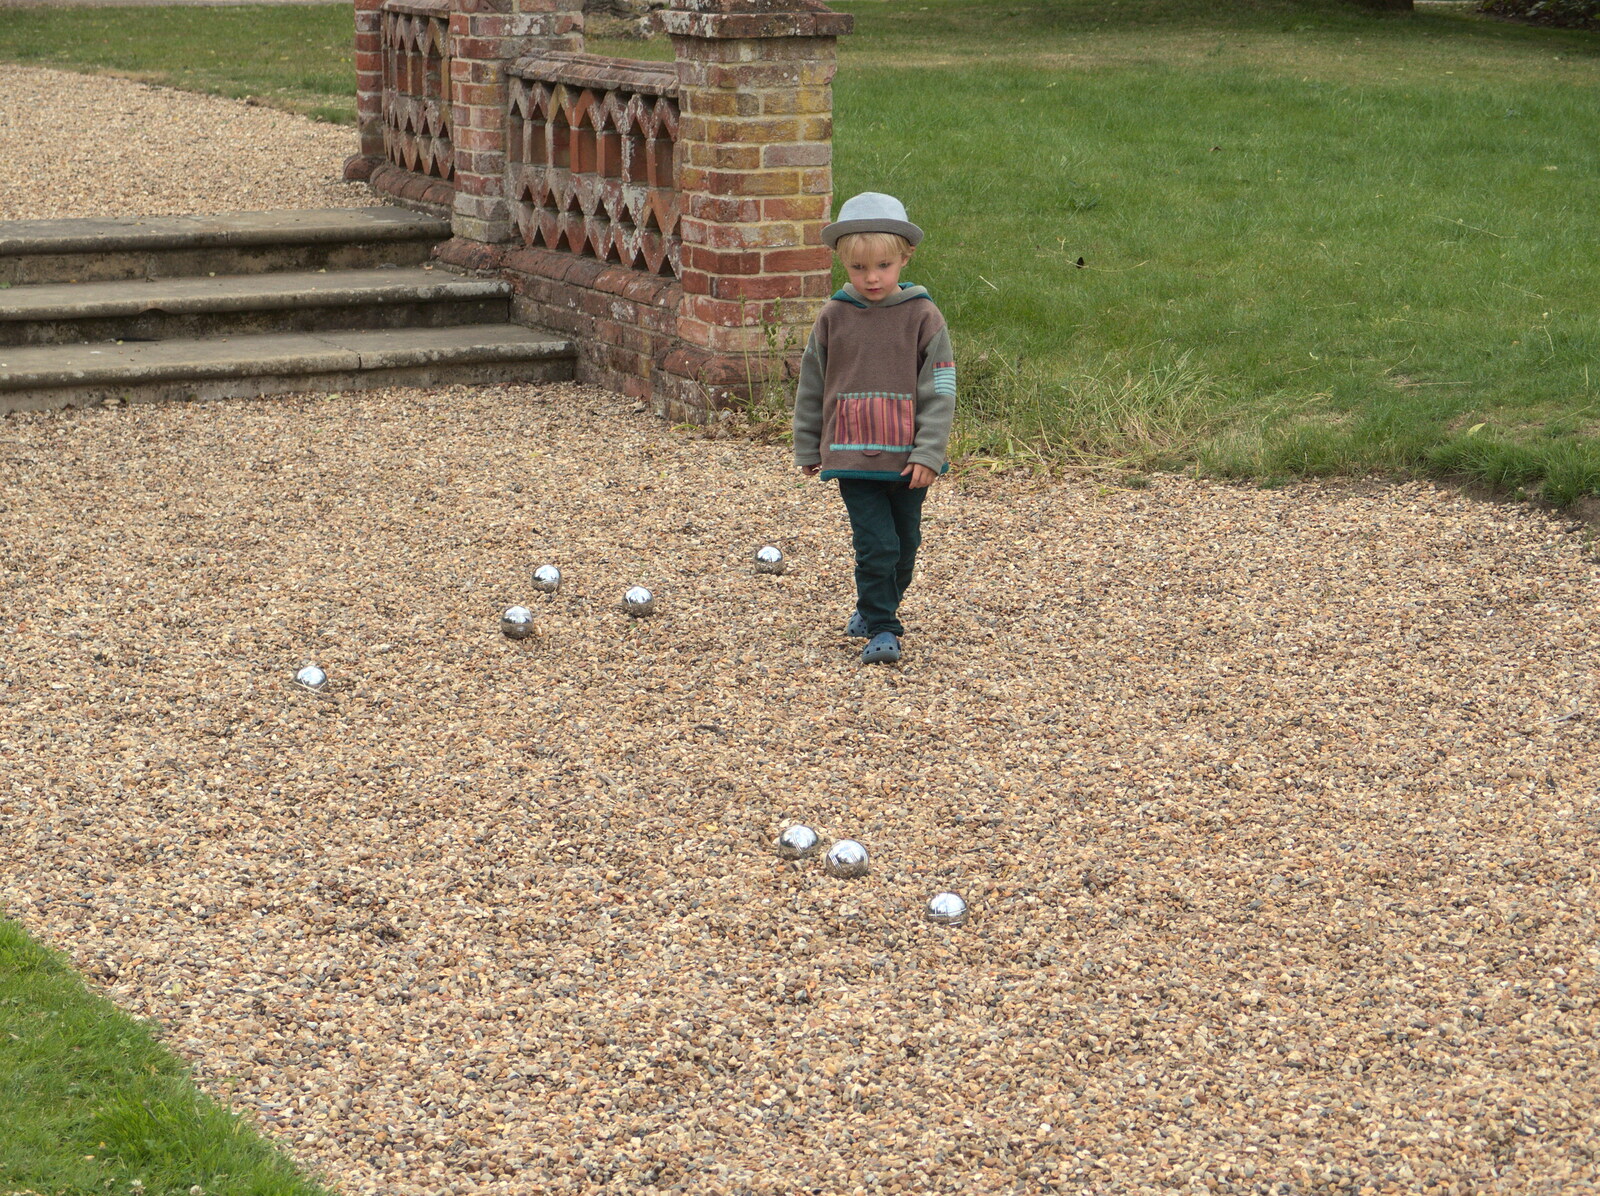 Harry with a load of boules from A Vintage Tractorey Sort of Day, Palgrave, Suffolk - 21st June 2015